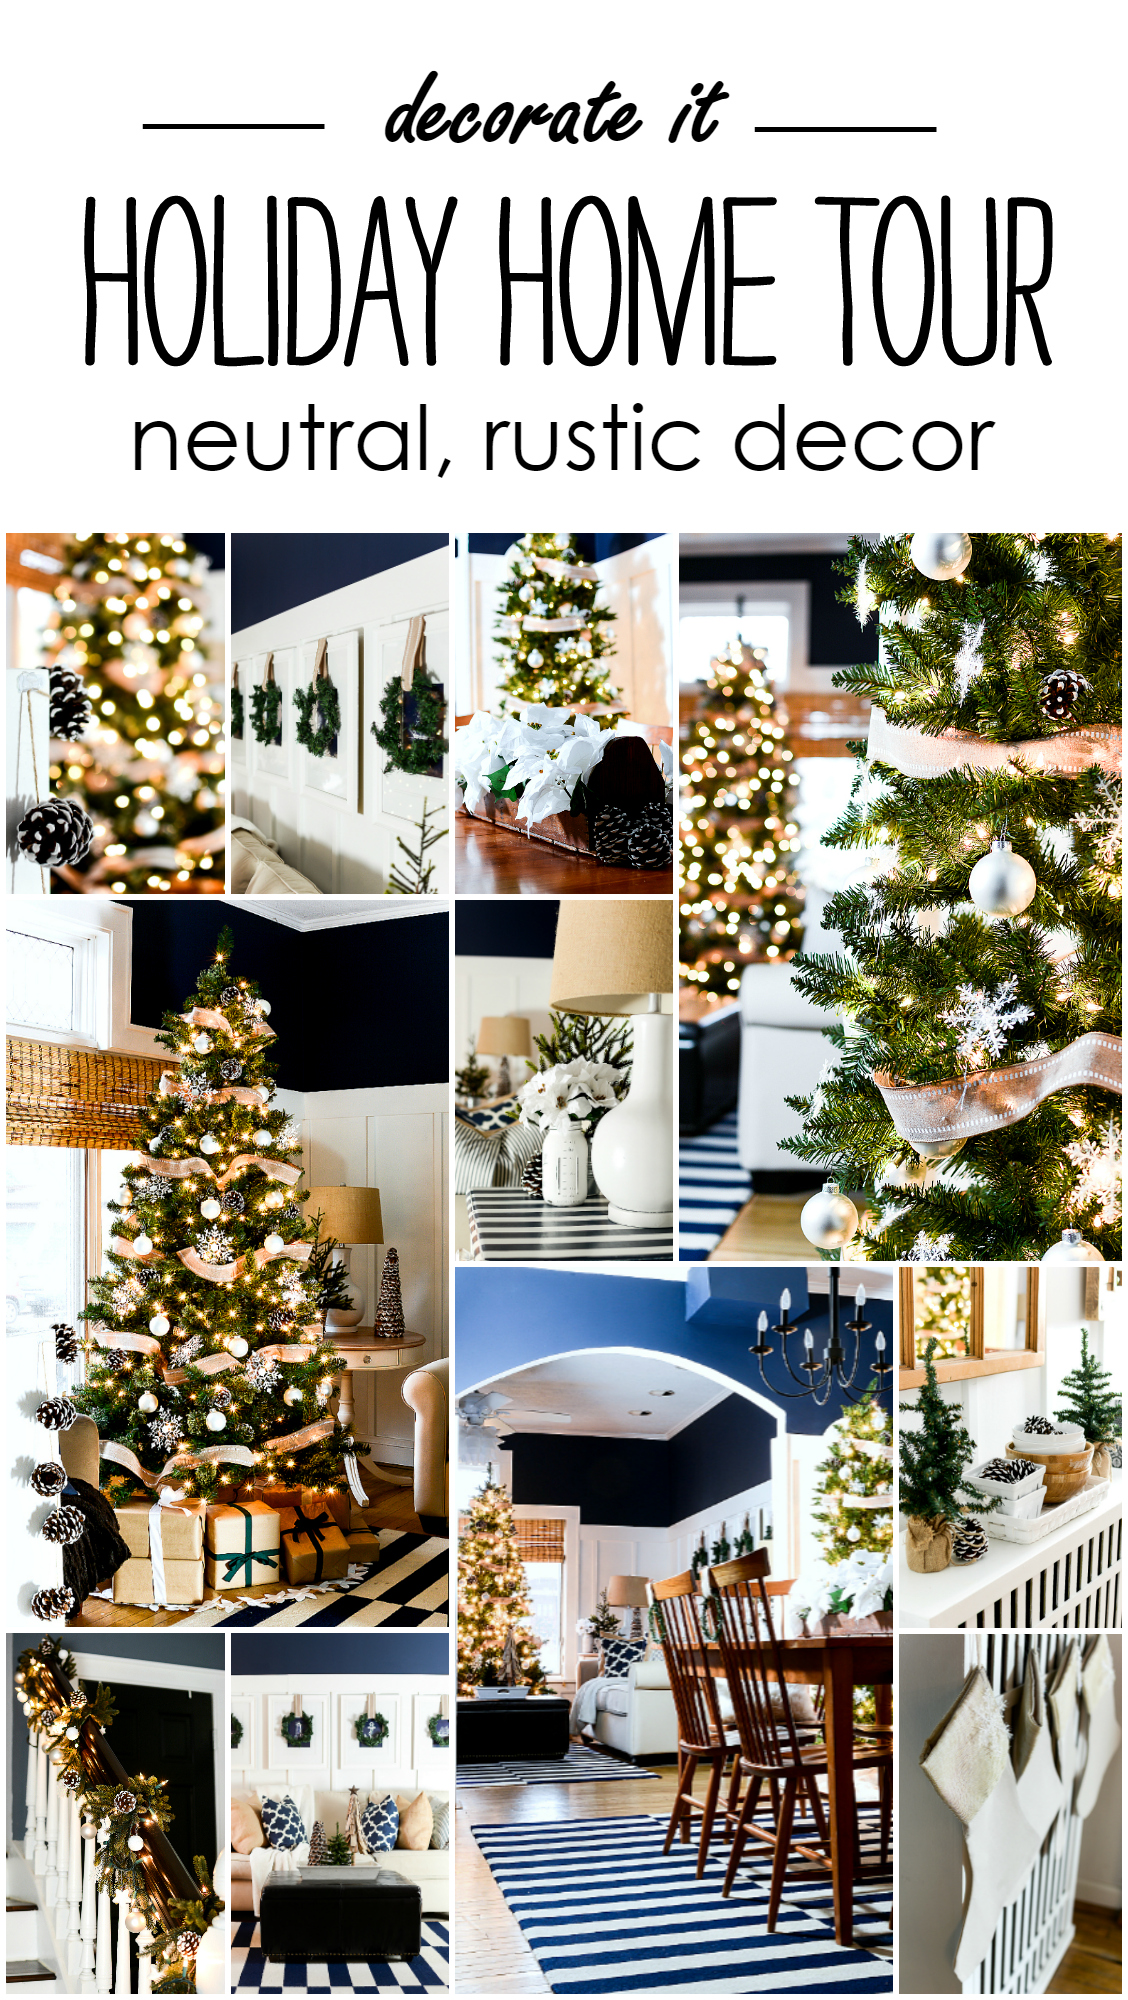 Christmas Decor in Neutral Colors with Navy and White